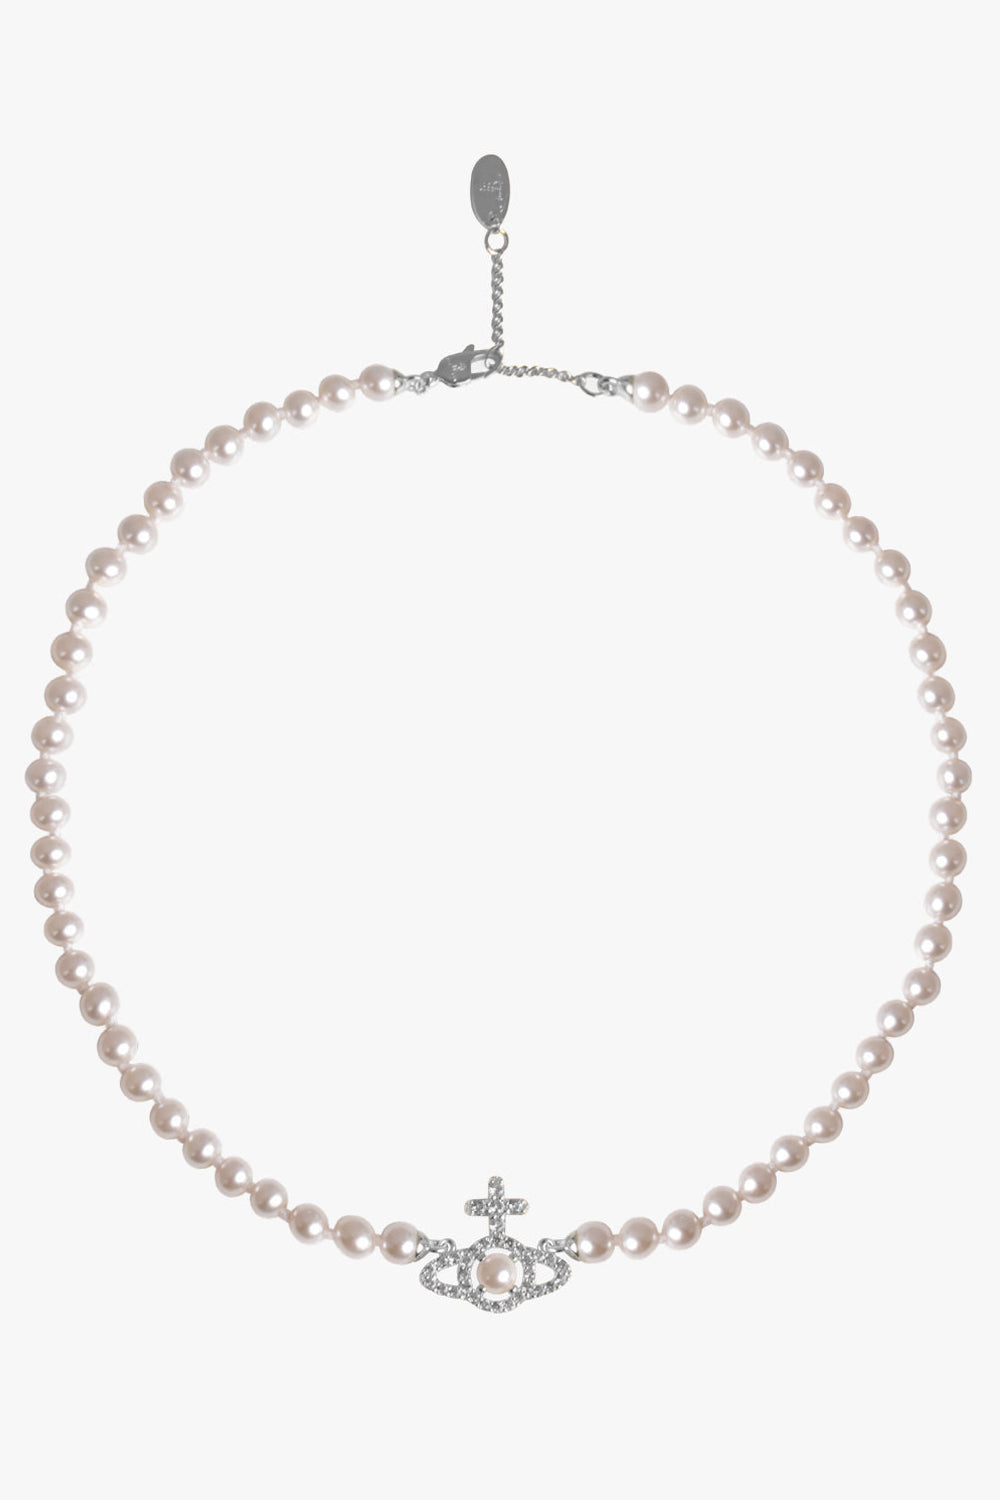 VIVIENNE WESTWOOD JEWELLRY SILVER / SILVER OLYMPIA PEARL NECKLACE | CREAM ROSE PEARL/SILVER